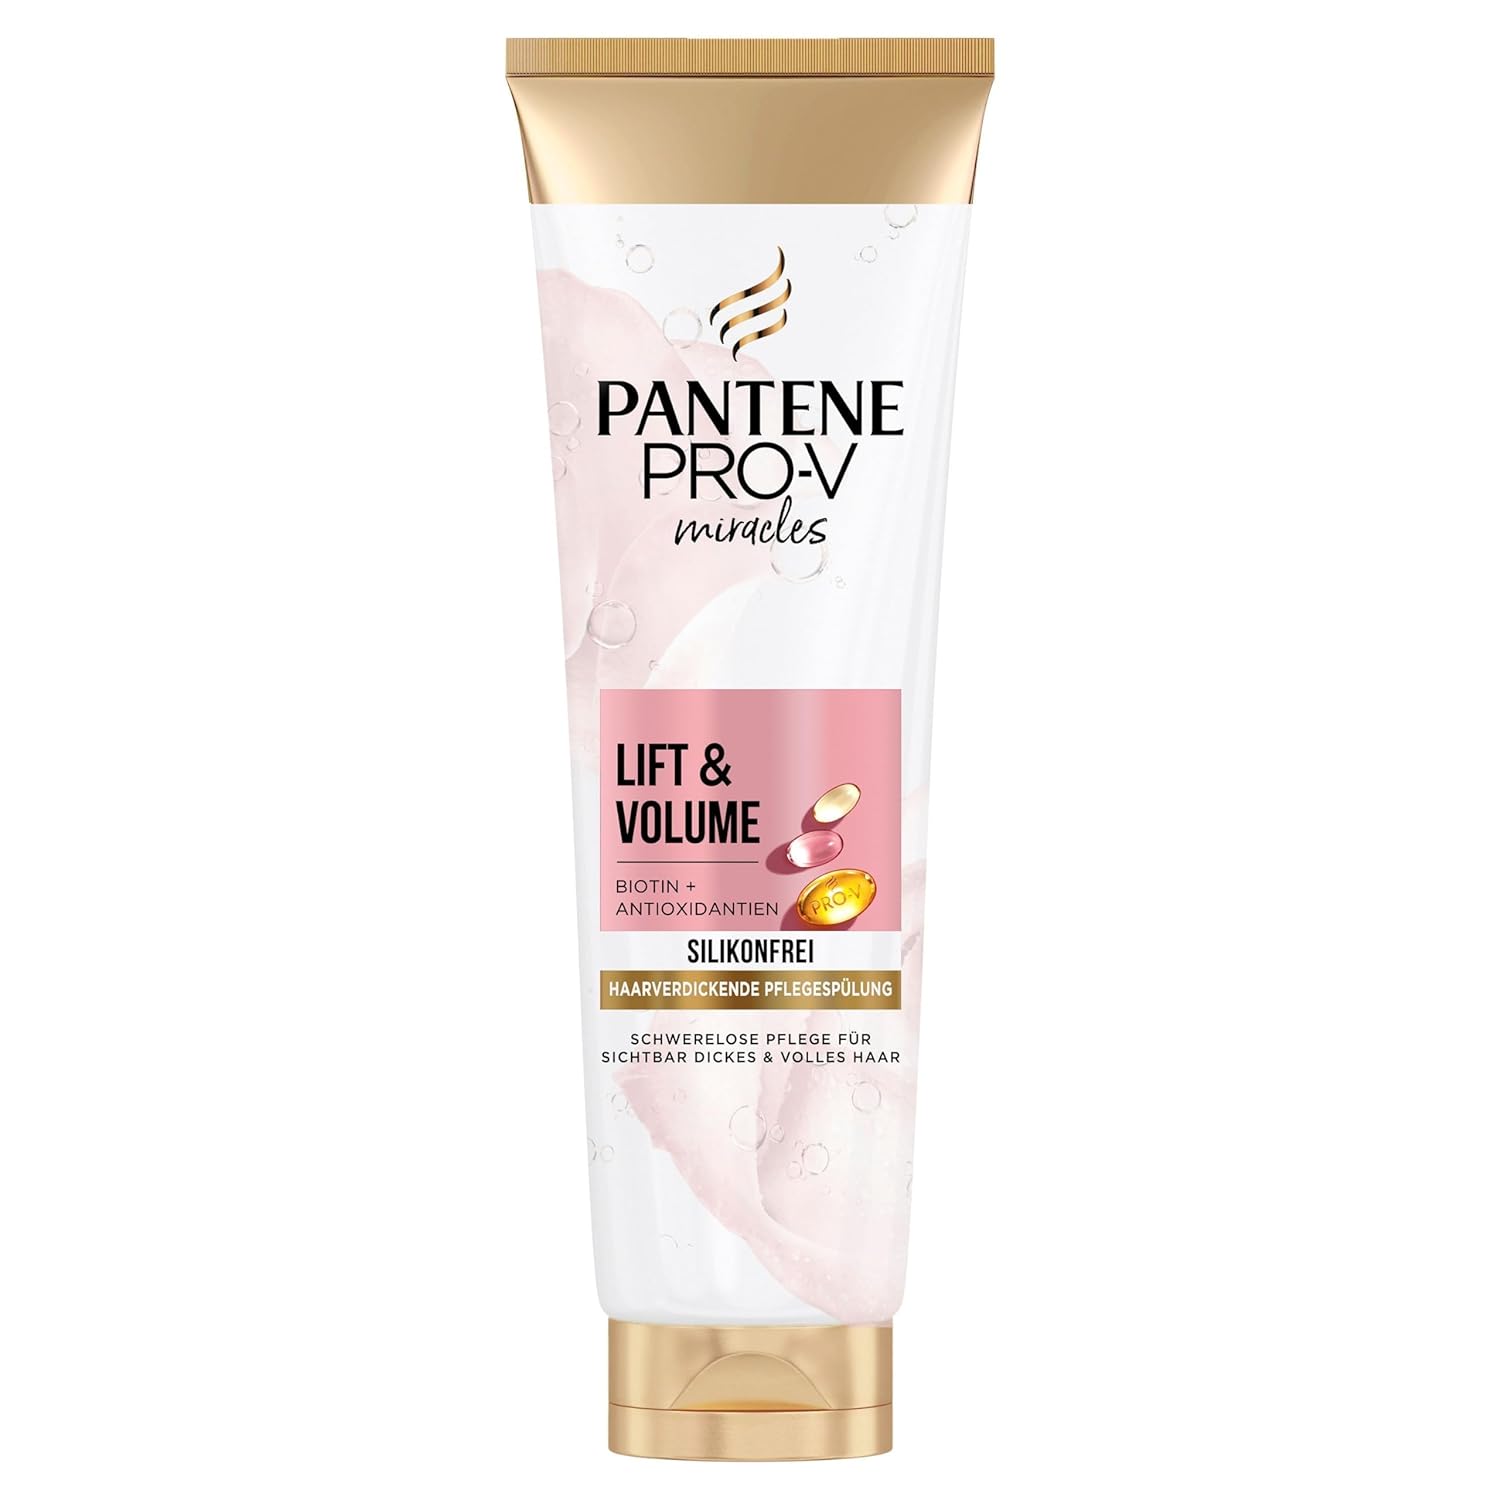 Pantene Pro-V Lift & Volume Hair Thicking Conditioner with Biotin, Silicone-Free, 160 ml, Pro-V Miracles Conditioner, Enriched with Antioxidants, Visibly Thicker and Fuller Hair